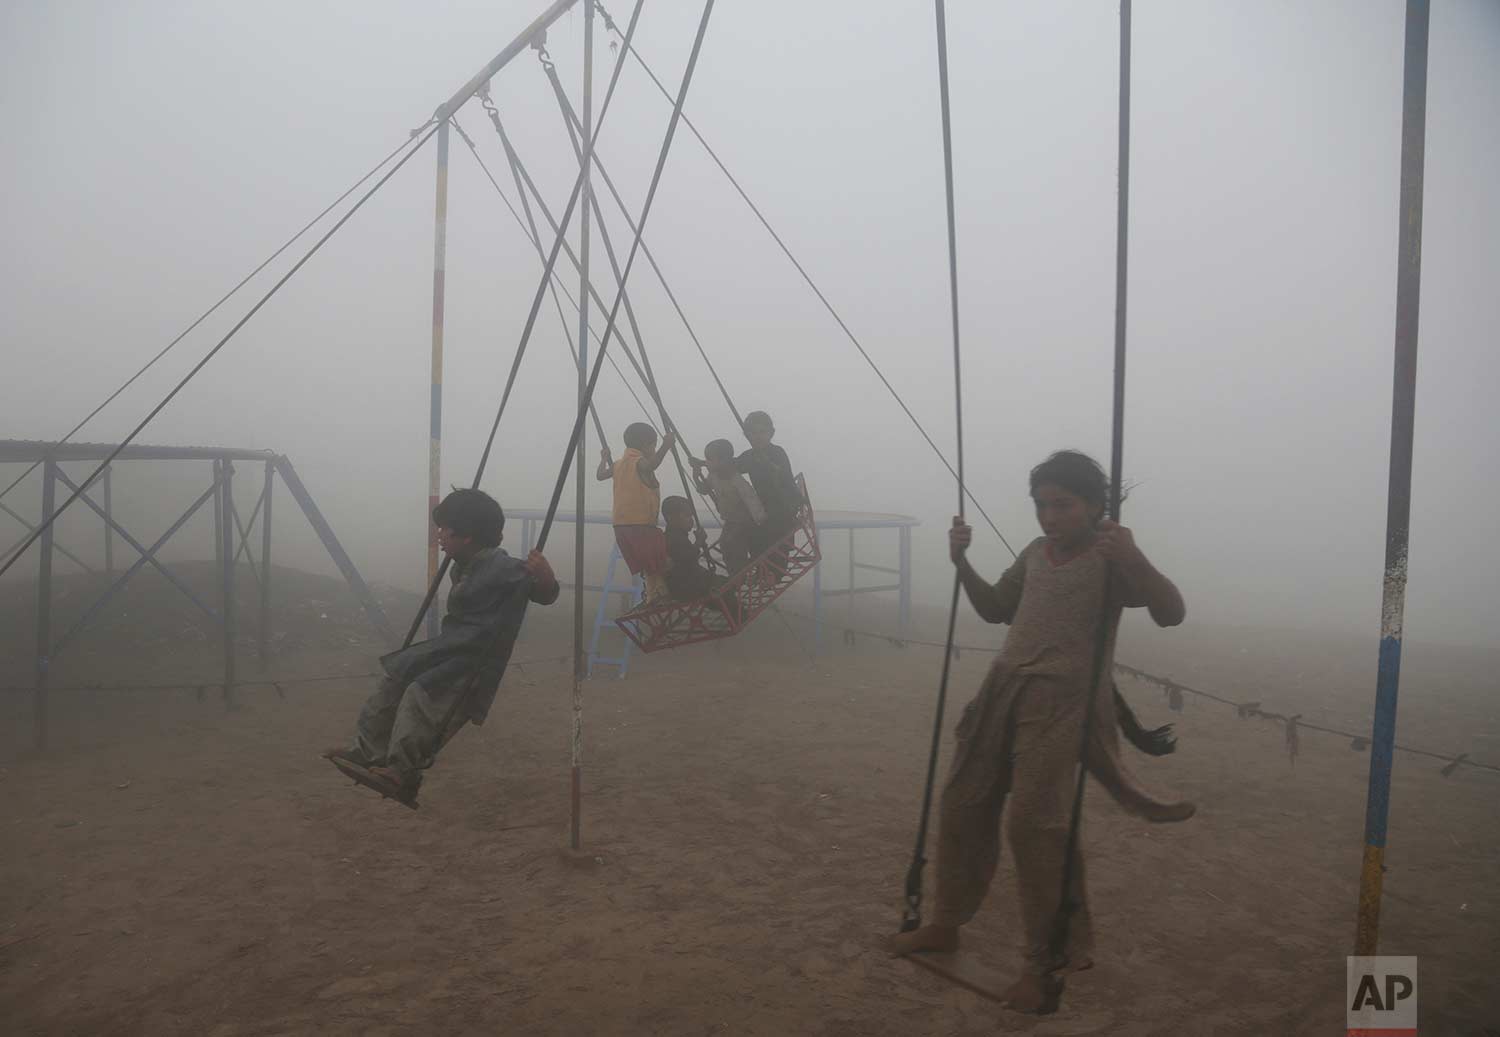  Children ride swings in a playground engulfed by smog in Lahore, Pakistan, Saturday, Nov. 11, 2017. Officials said smog has enveloped much of the country, causing highway accidents and respiratory problems, and forcing many residents to stay home. (AP Photo/K.M. Chaudary) 